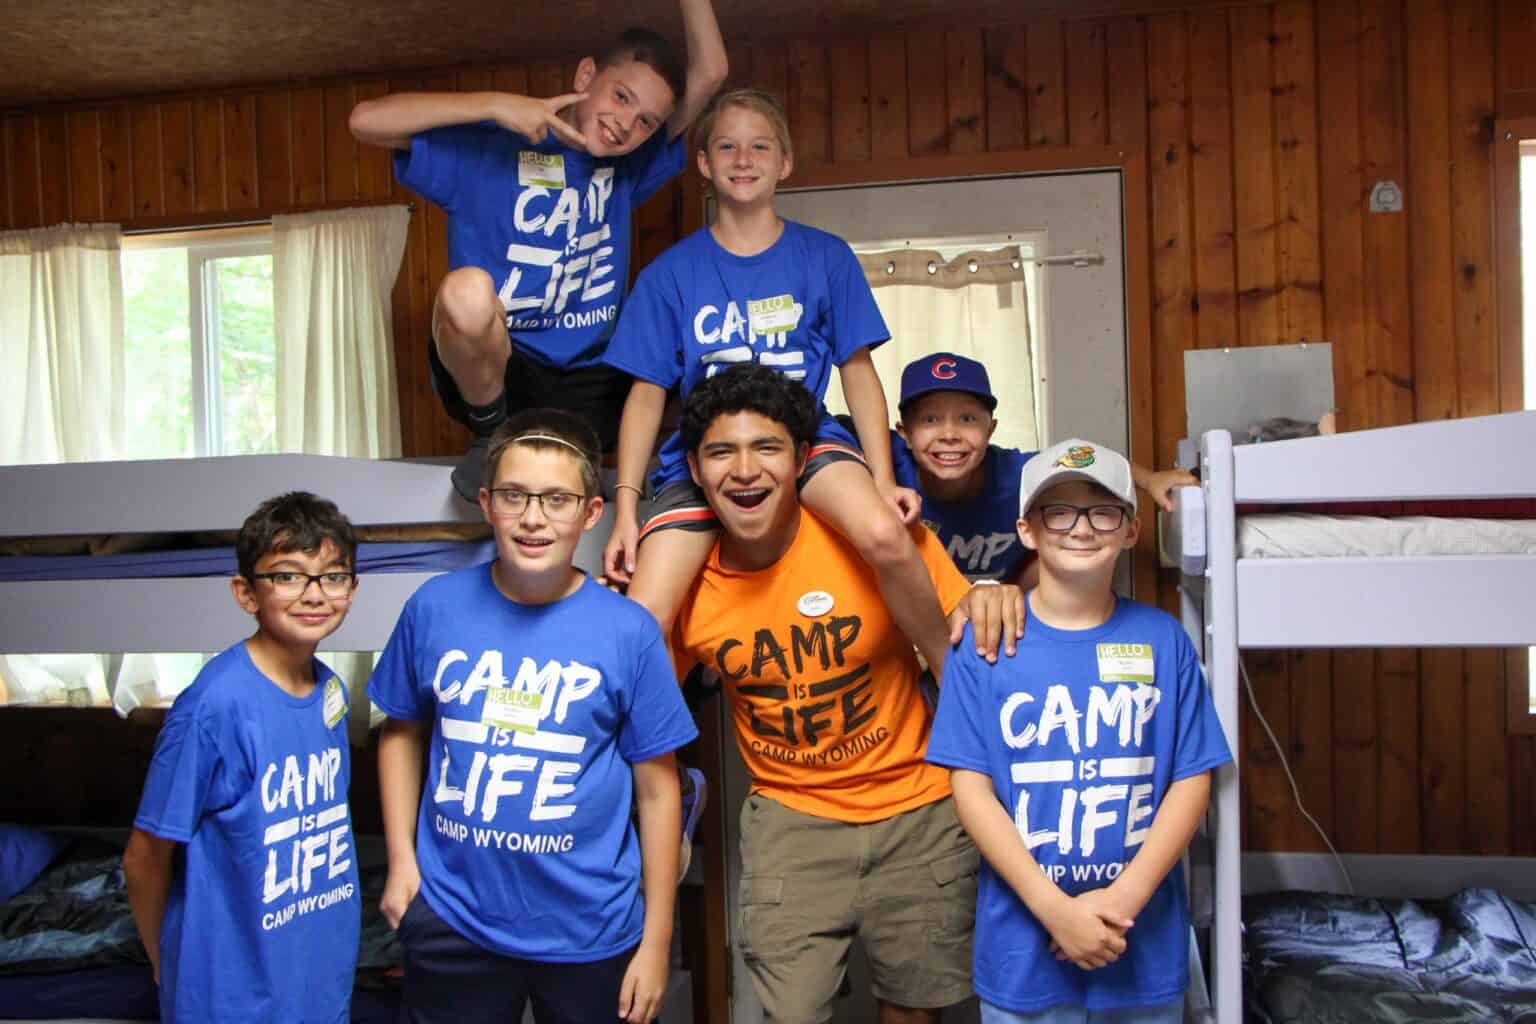 A group of kids posing for a picture in a bunk room at summer camp in Iowa.